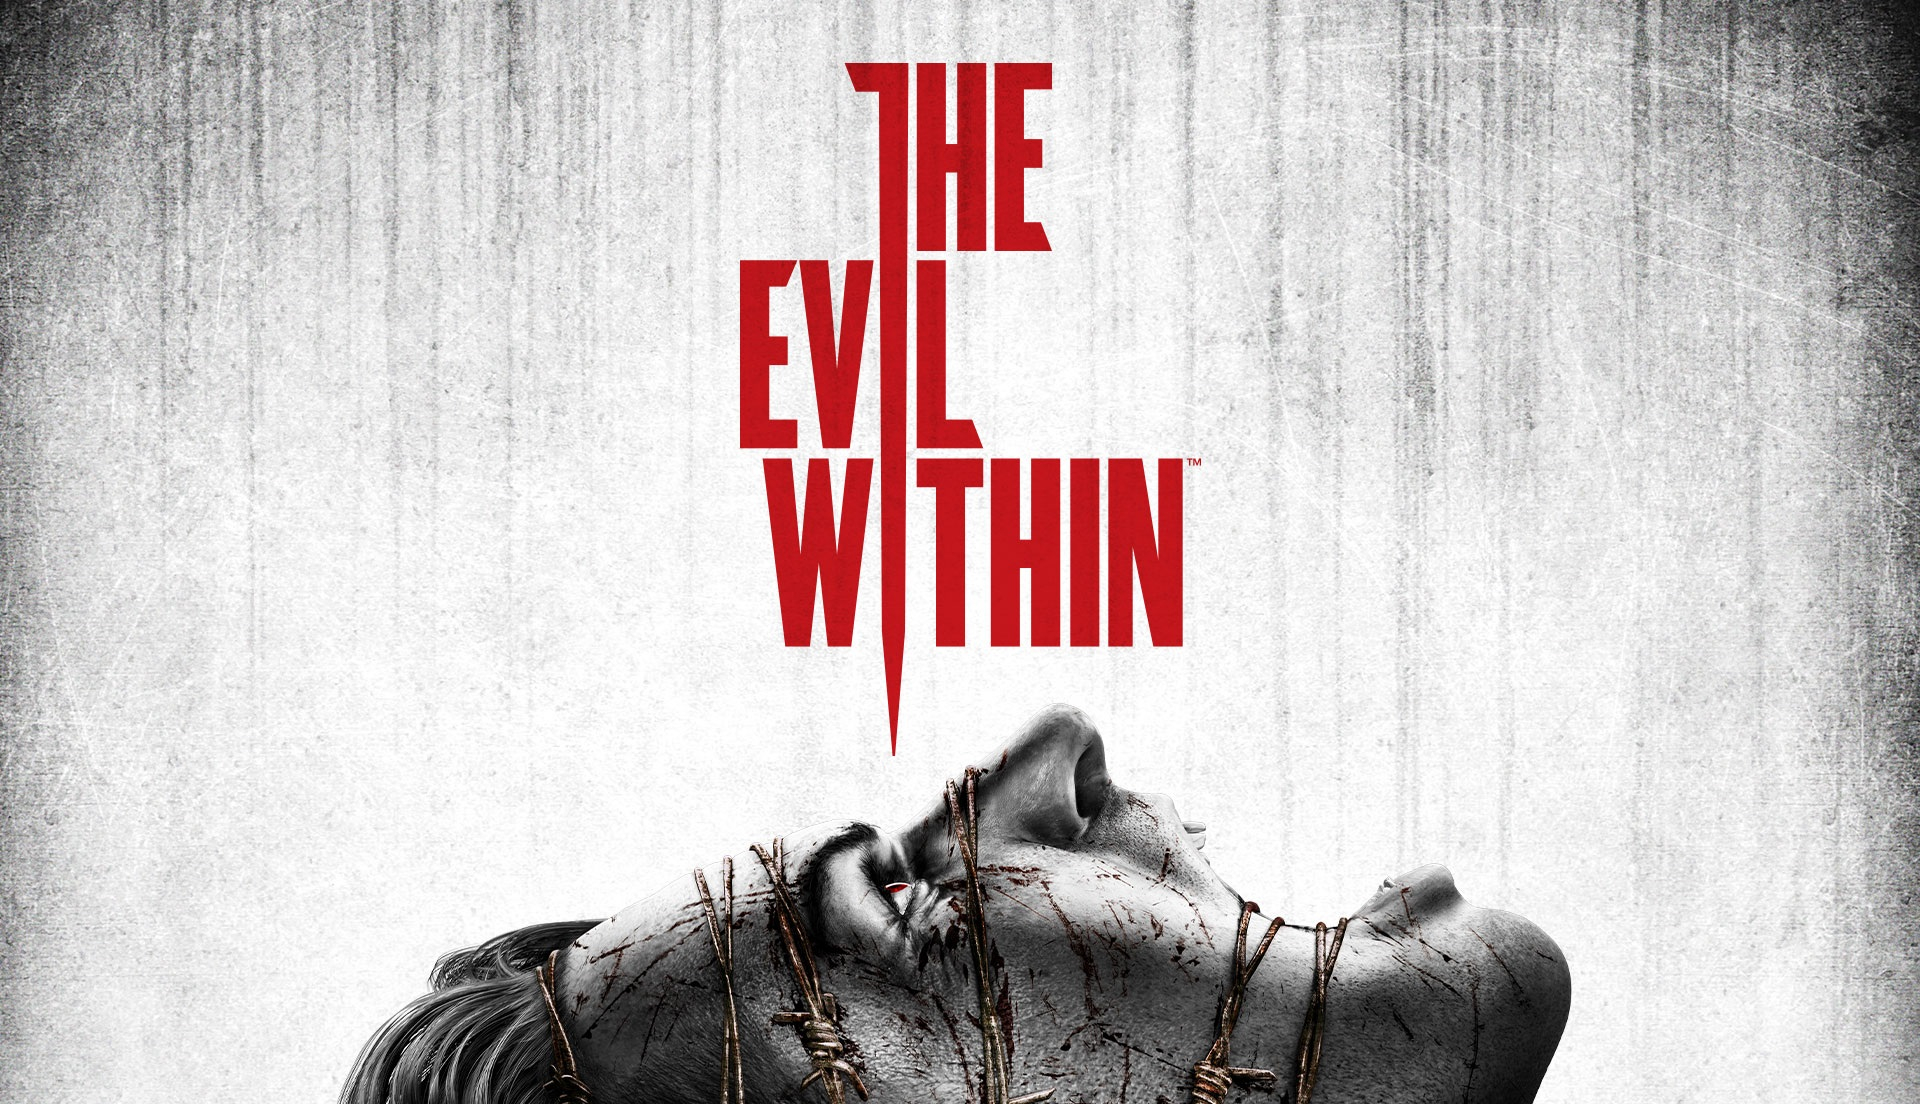 Трейлер #1 Evil Within, The